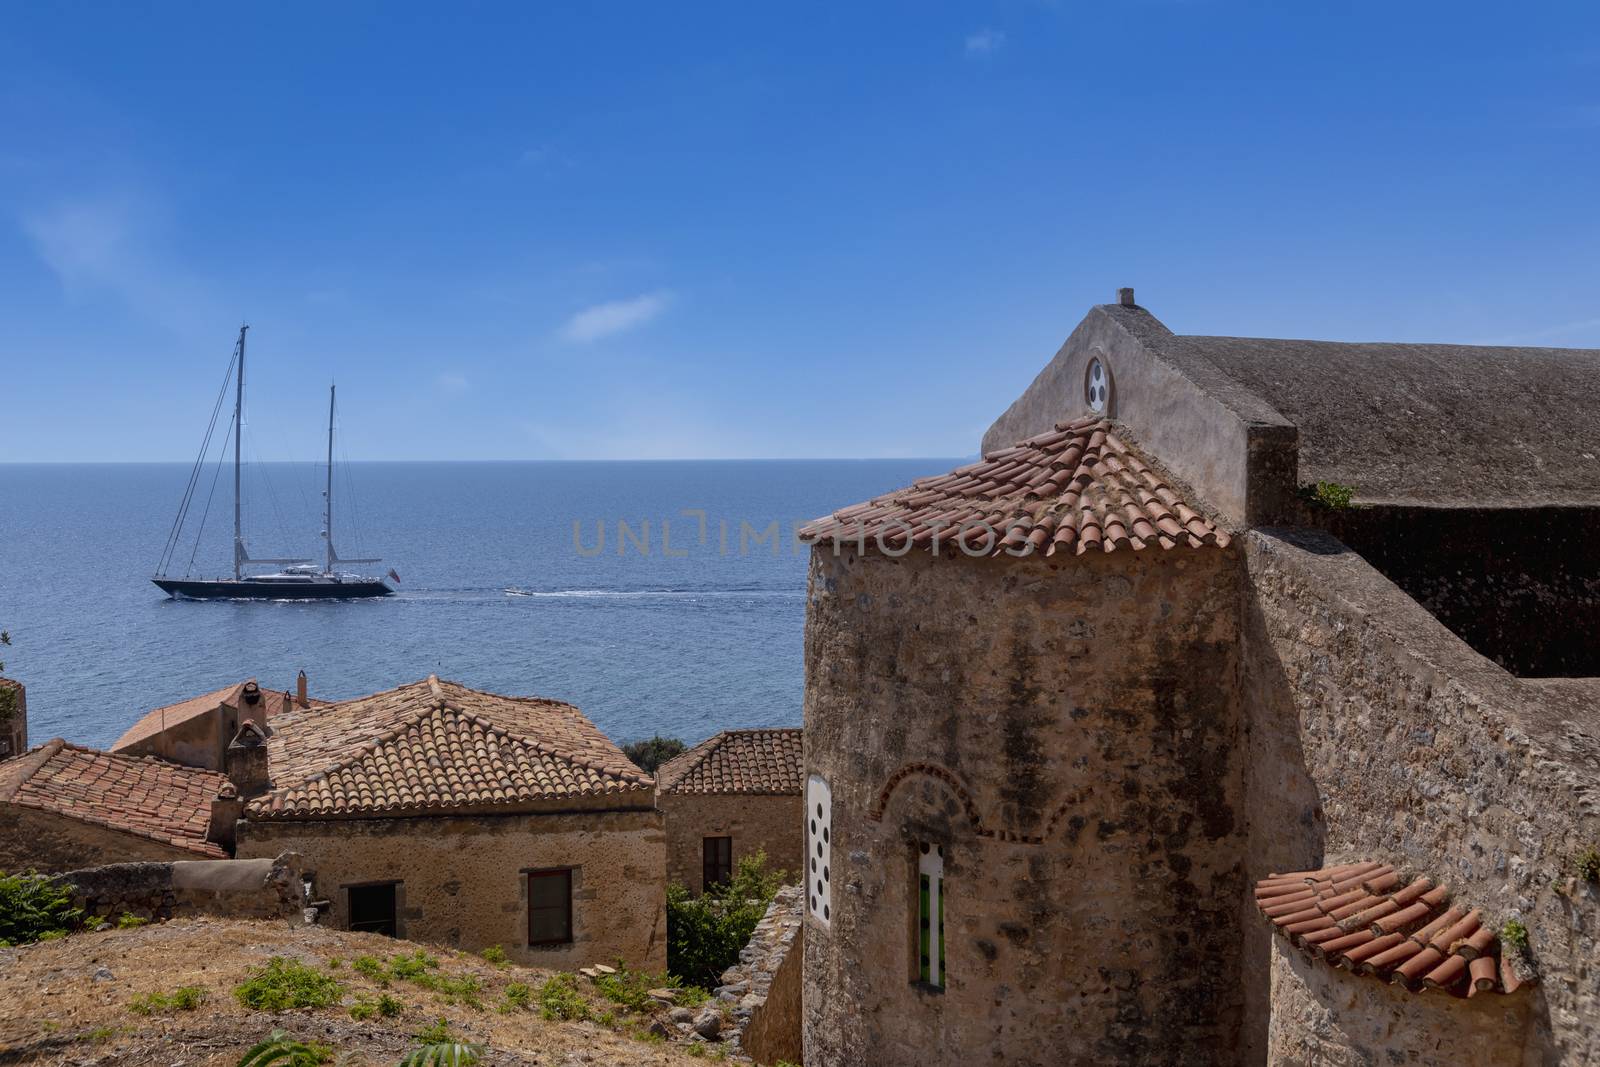 View of the old town of Monemvasia in Lakonia of Peloponnese, Gr by ververidis